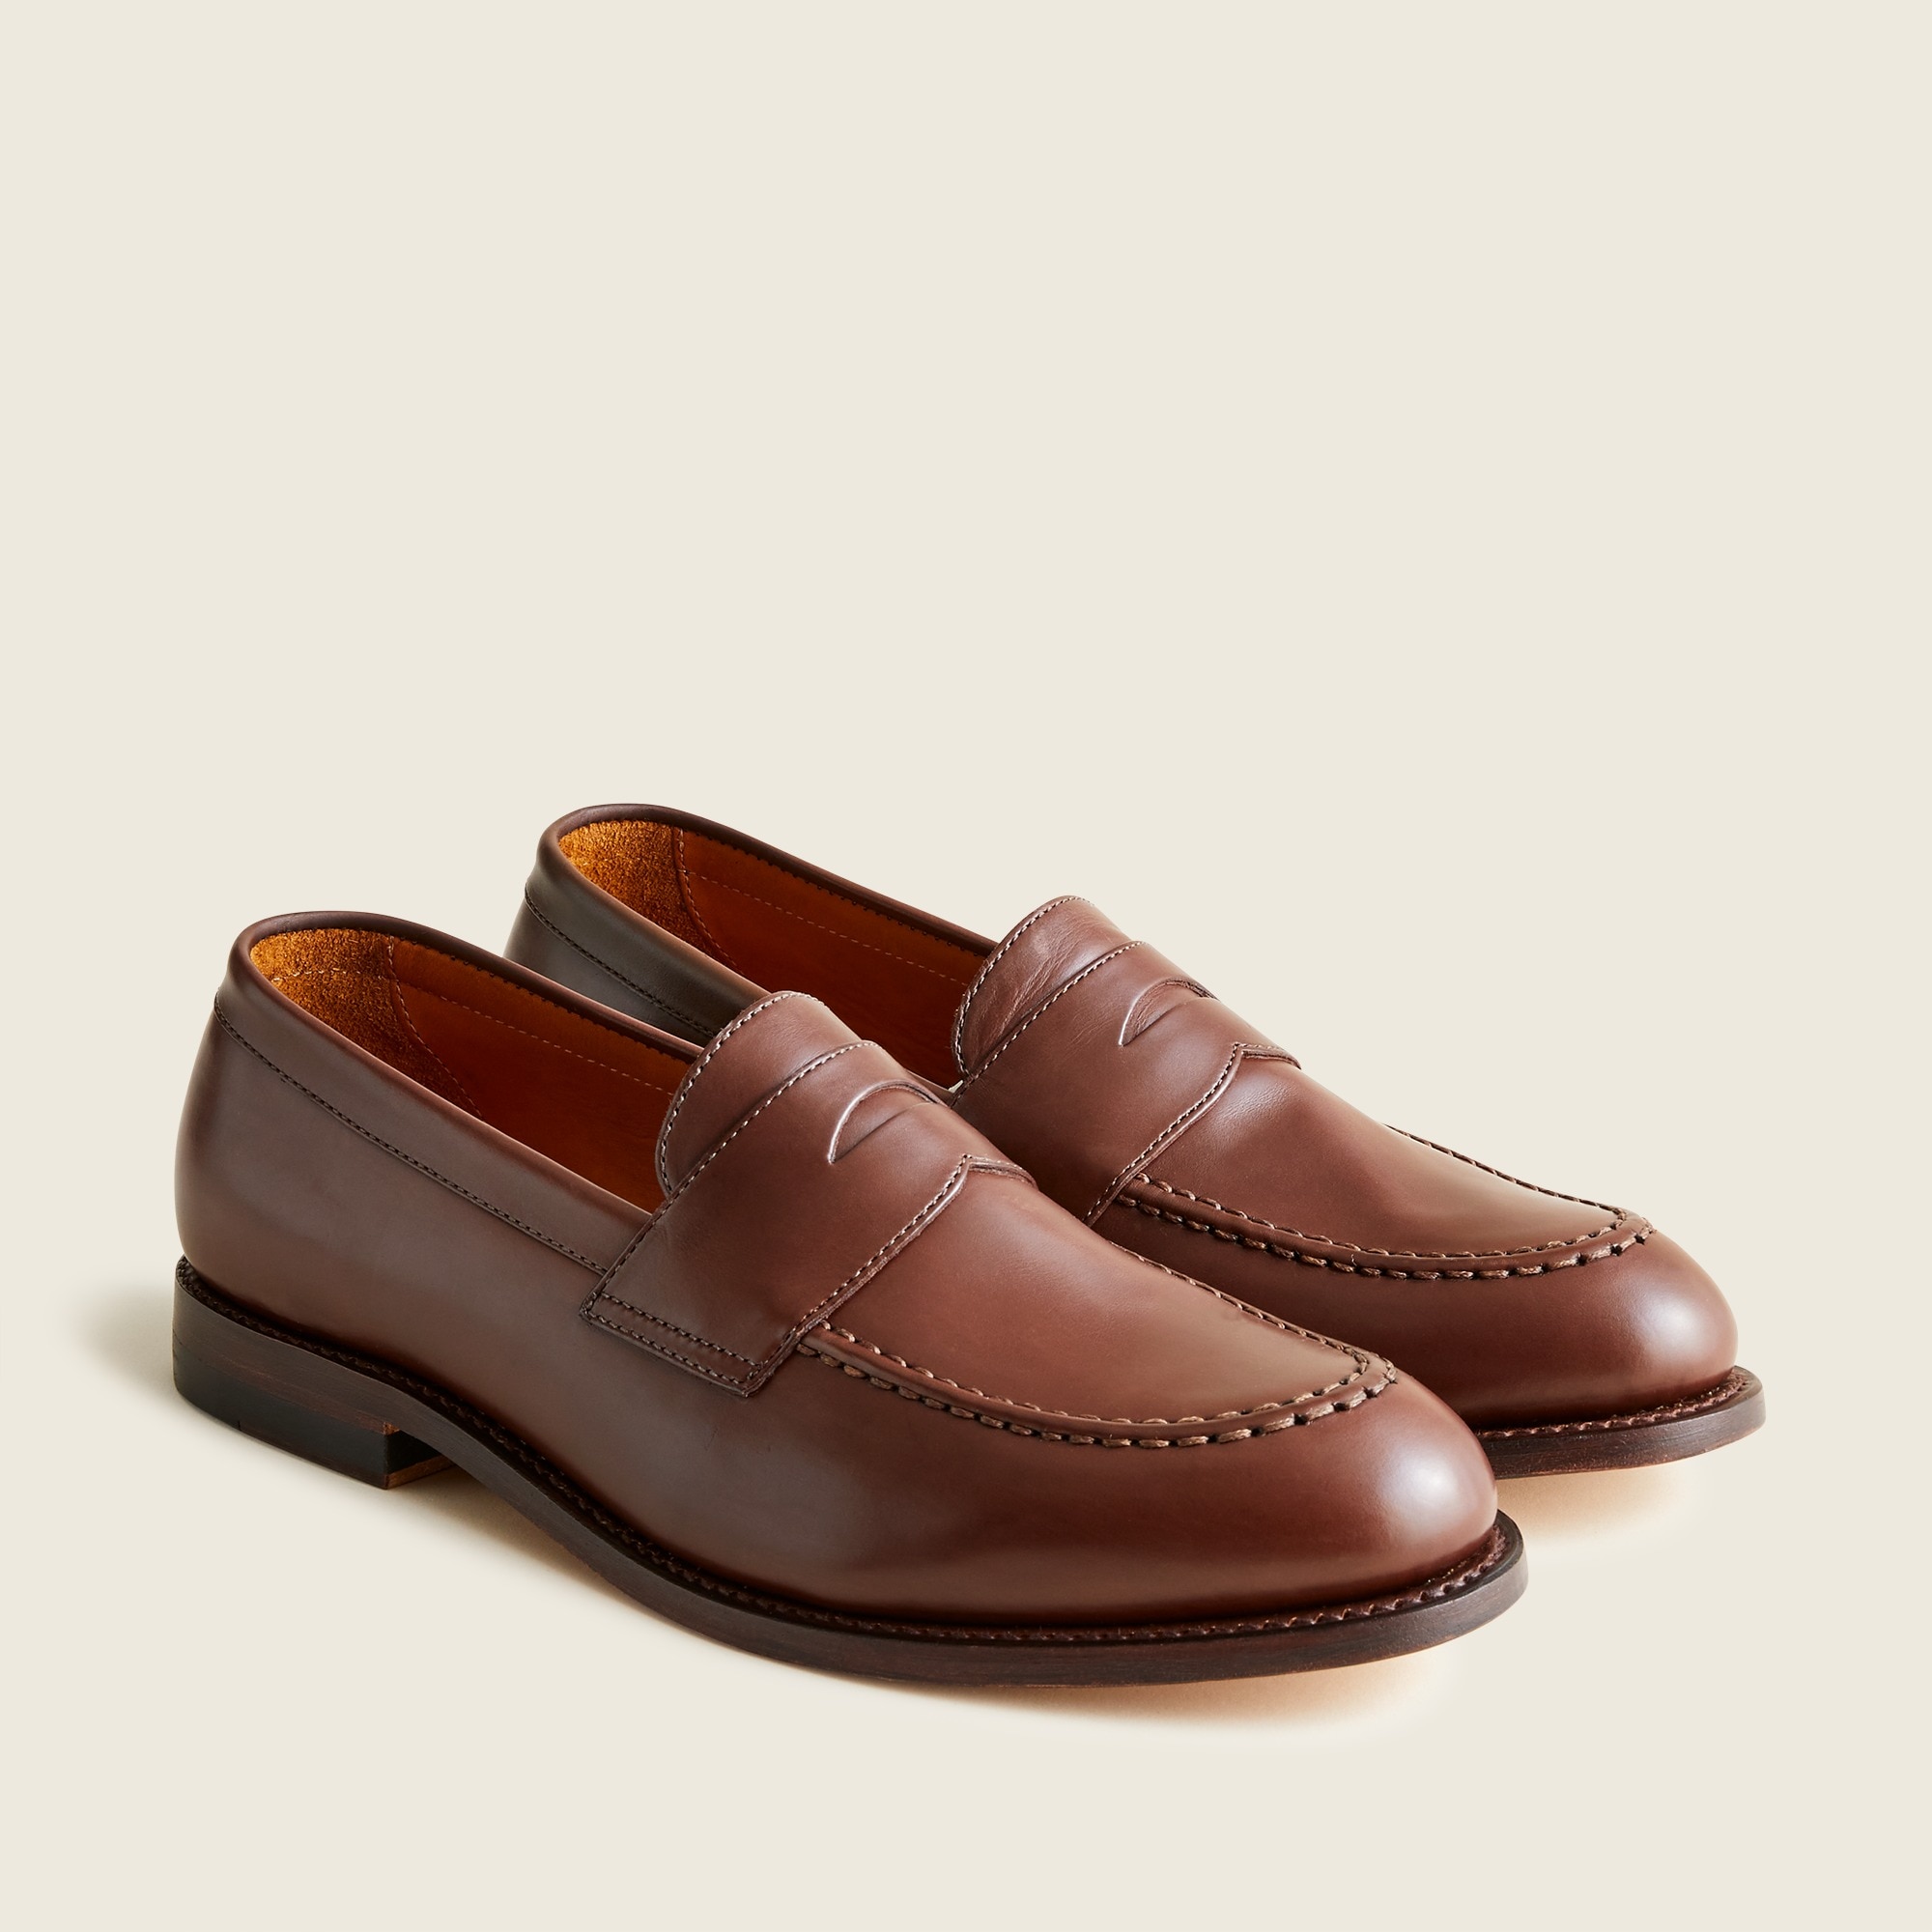 J.Crew: Ludlow Penny Loafers For Men